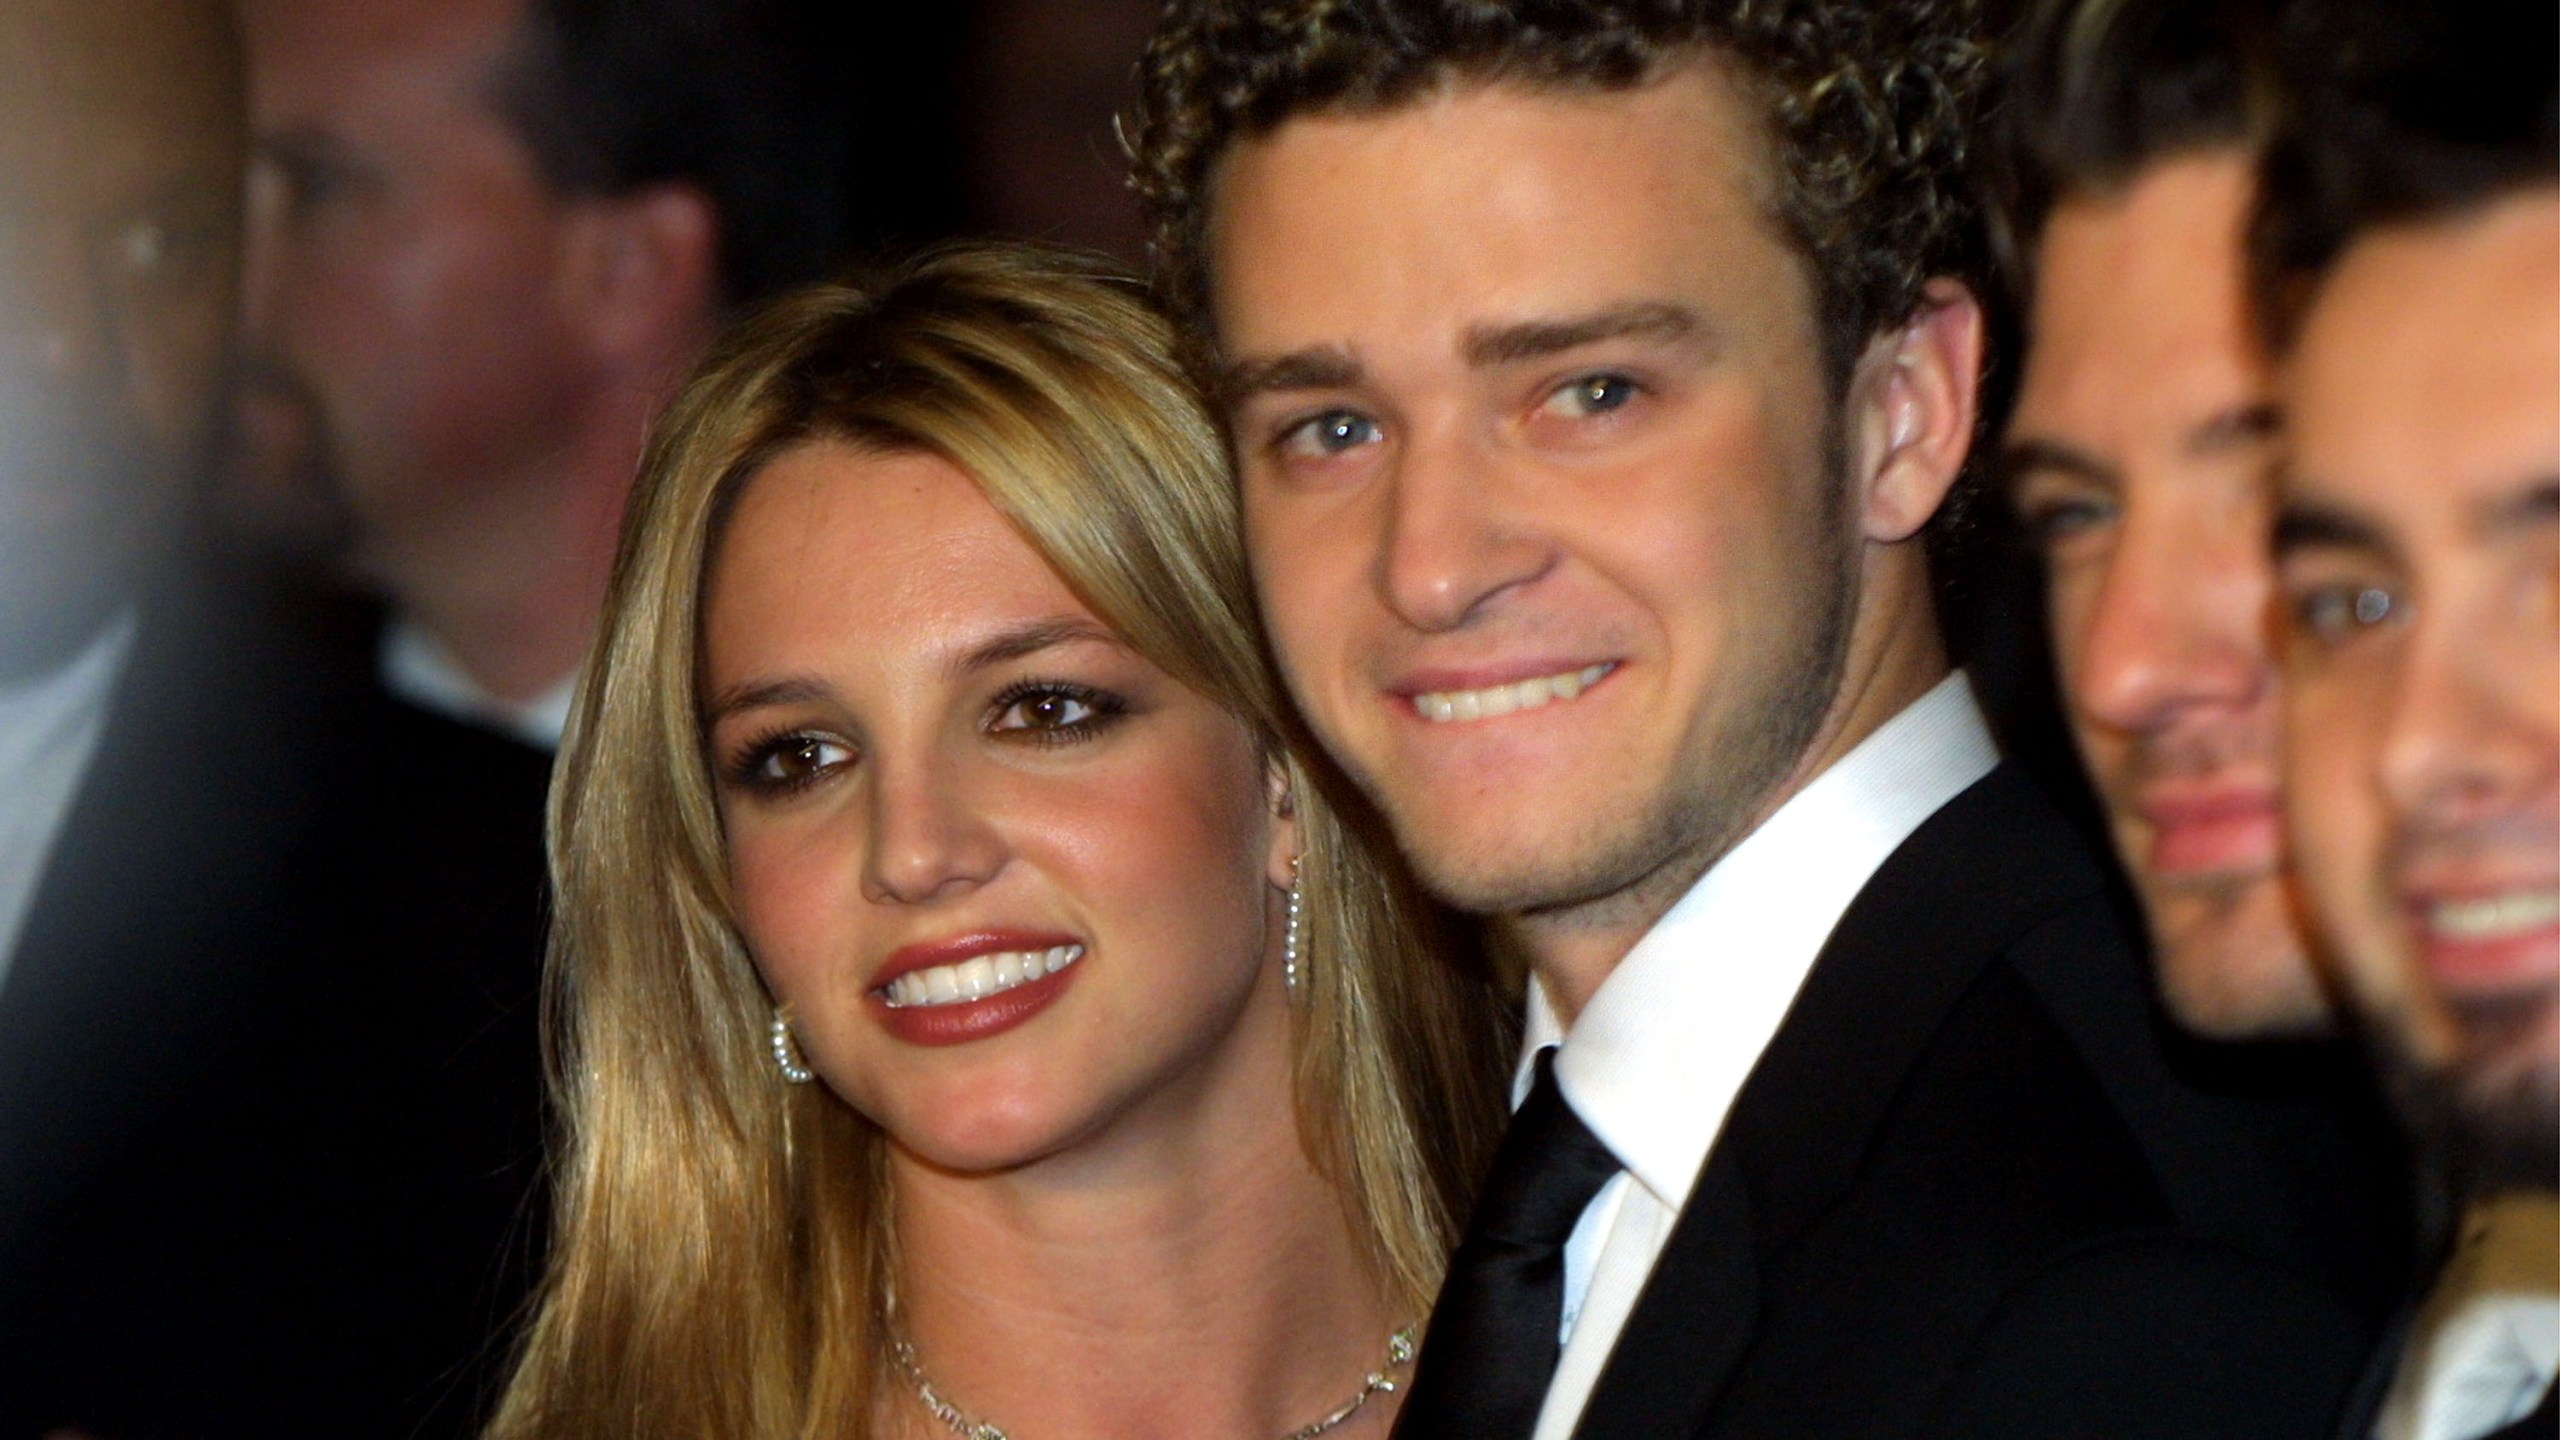 Britney Spears reveals she had abortion with ex Justin Timberlake | FOX 2